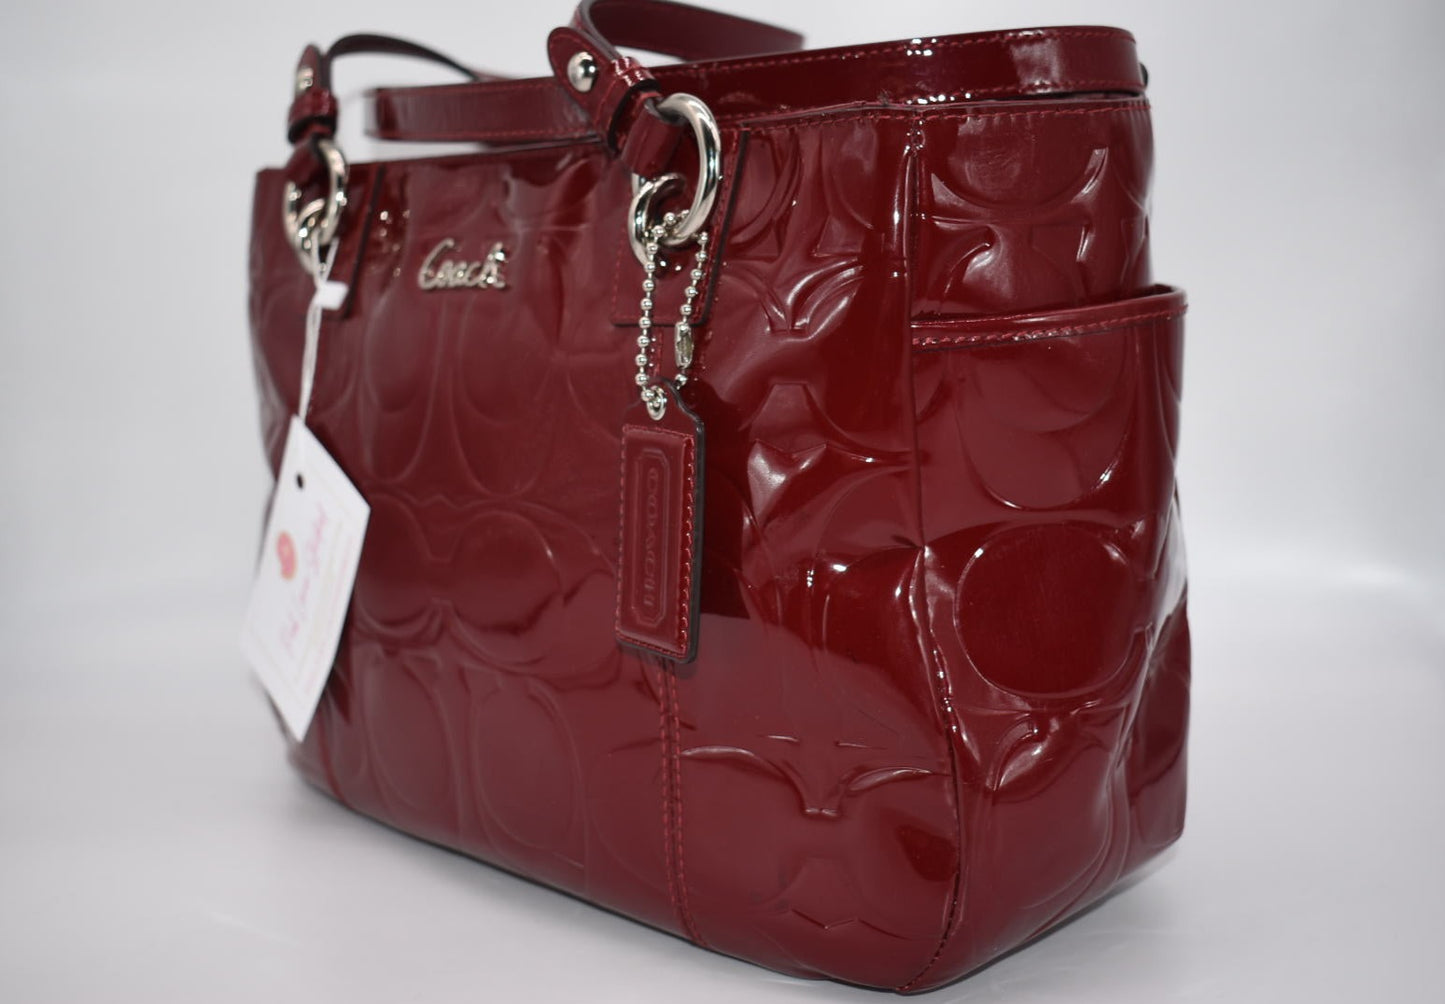 Coach Gallery Merlot Embossed Signature Patent Leather Tote Bag